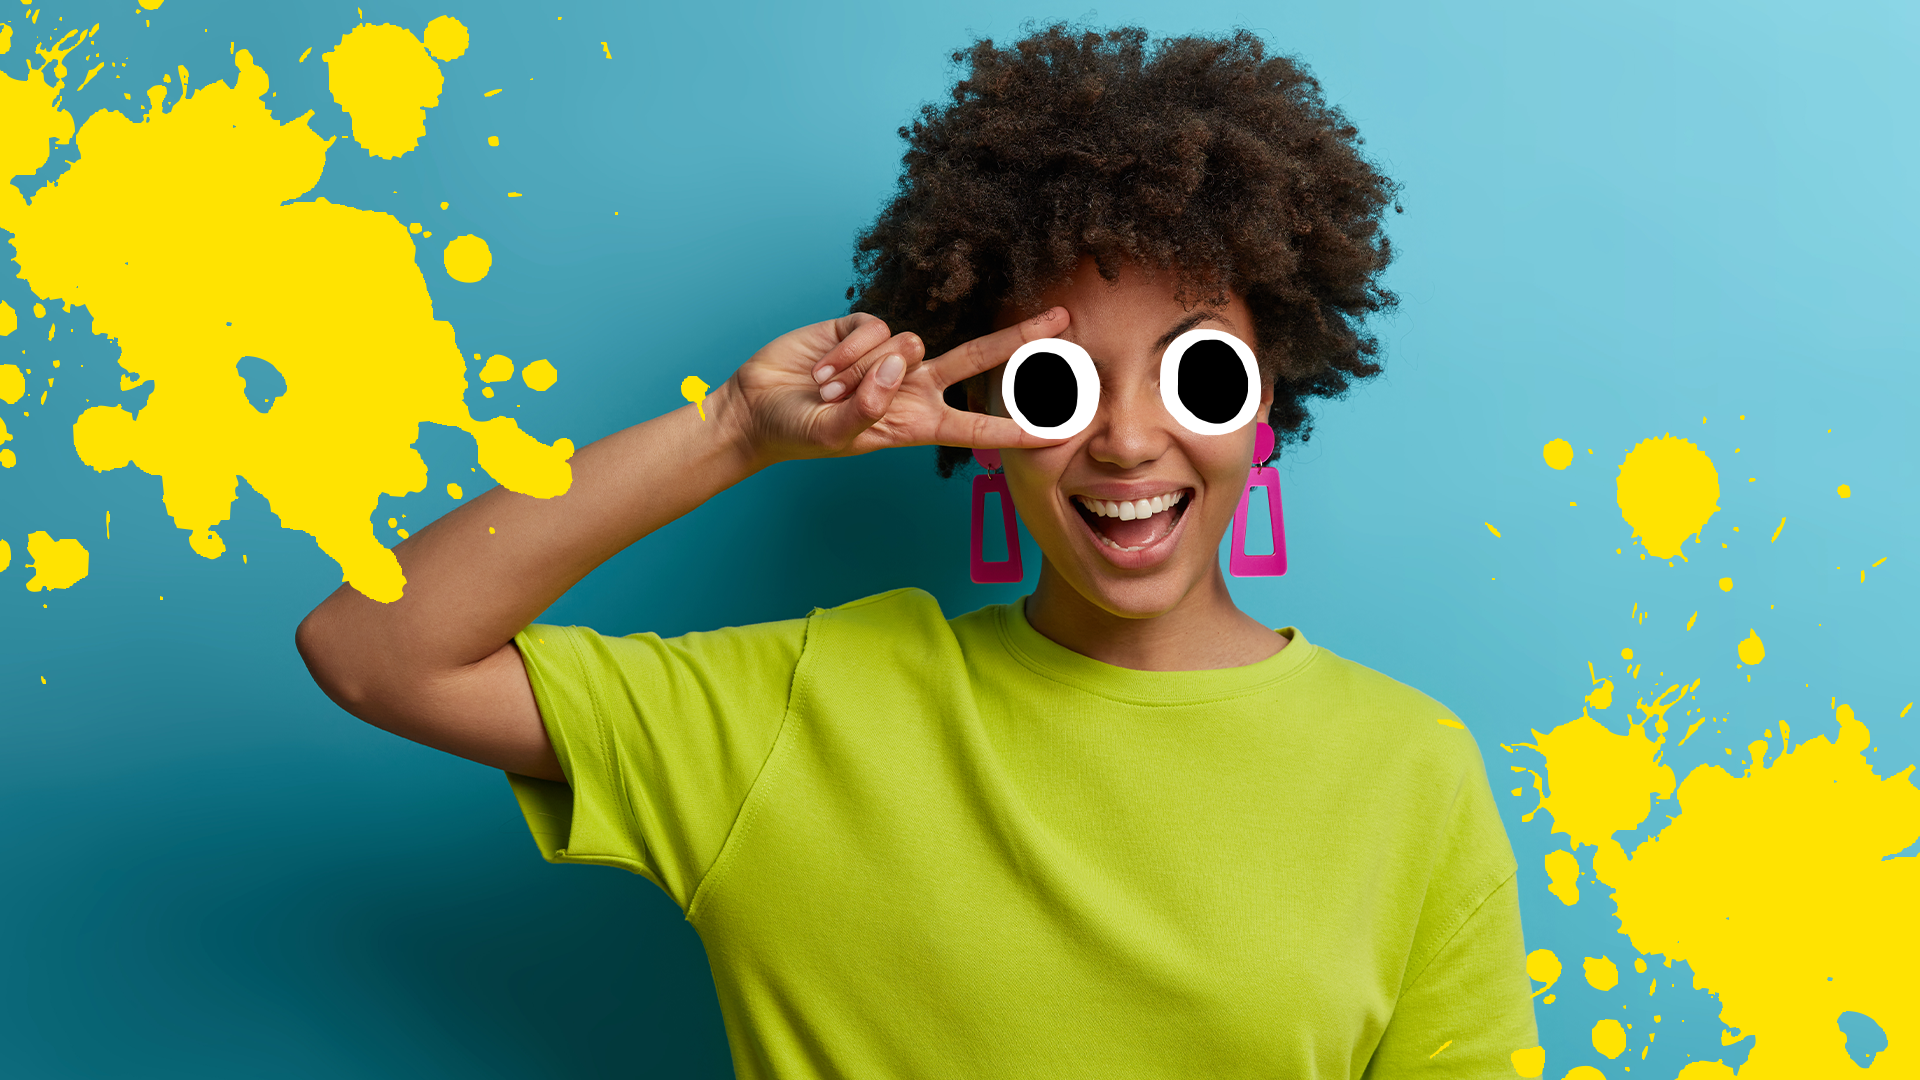 Happy looking woman on blue background with yellow splats